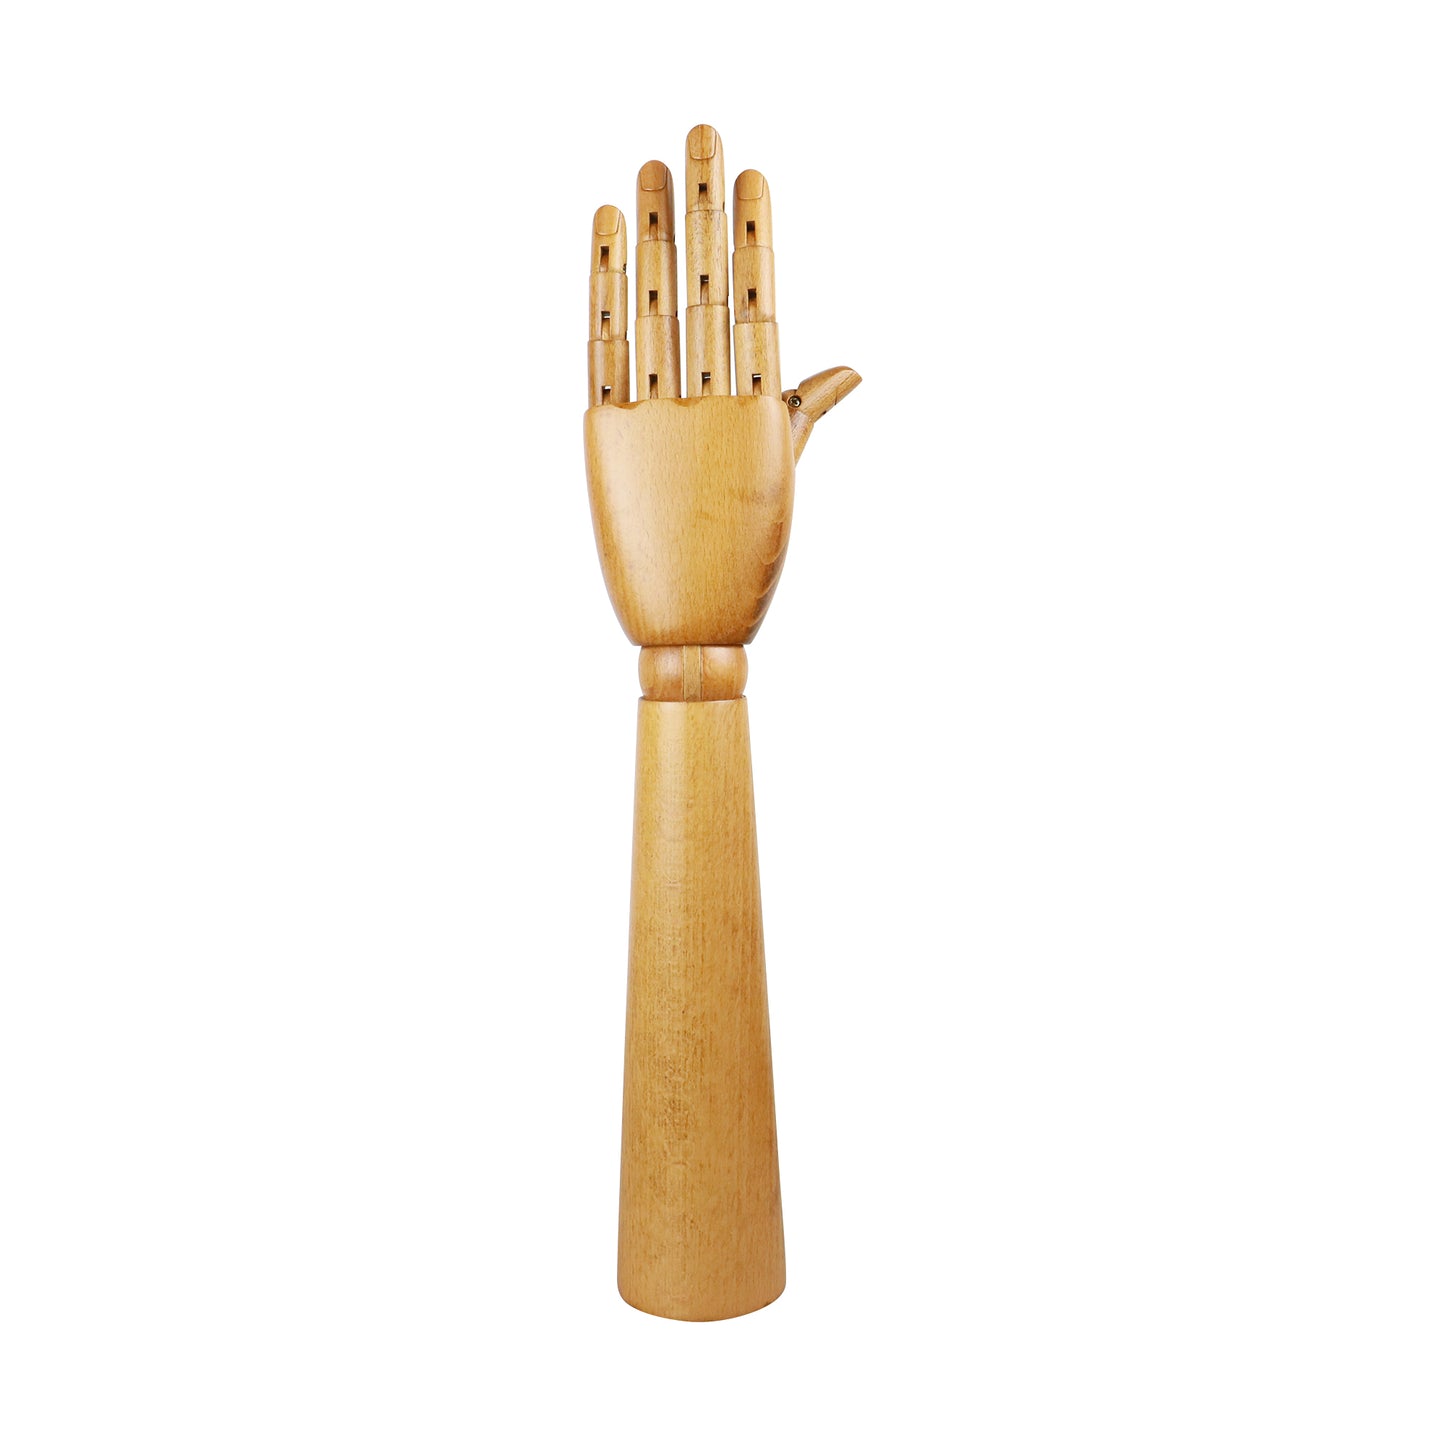 Jelimate Movable Wooden Hand Mannequin,High Quality Wood Mannequin Hand Display,Flexible Fingers Jewelry Display Props